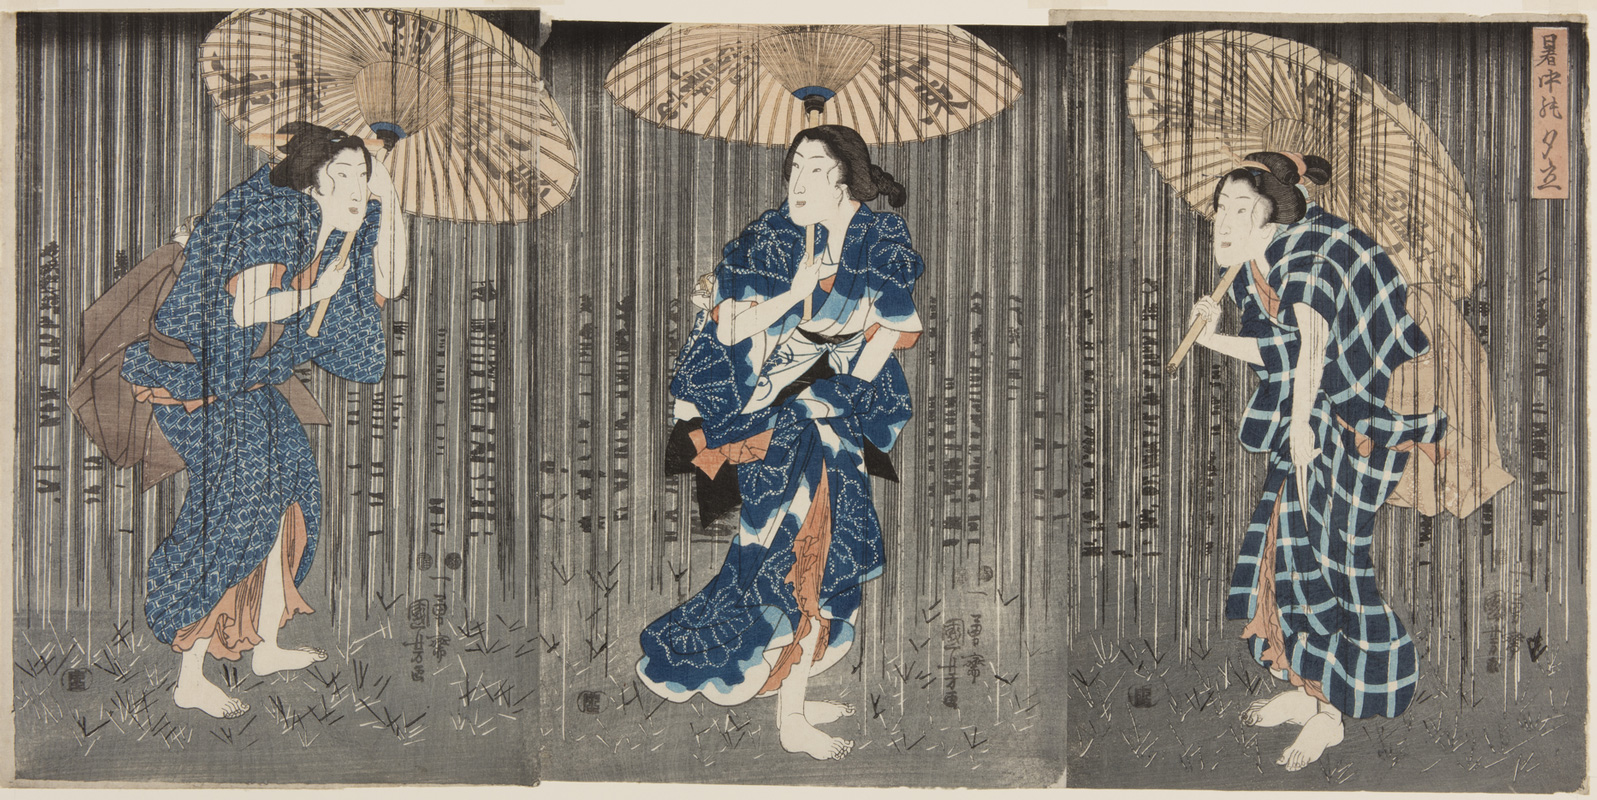 Japanese print of three people dressed in traditional clothes and bare feet standing on the grass, they clutch umbrellas against the rain.